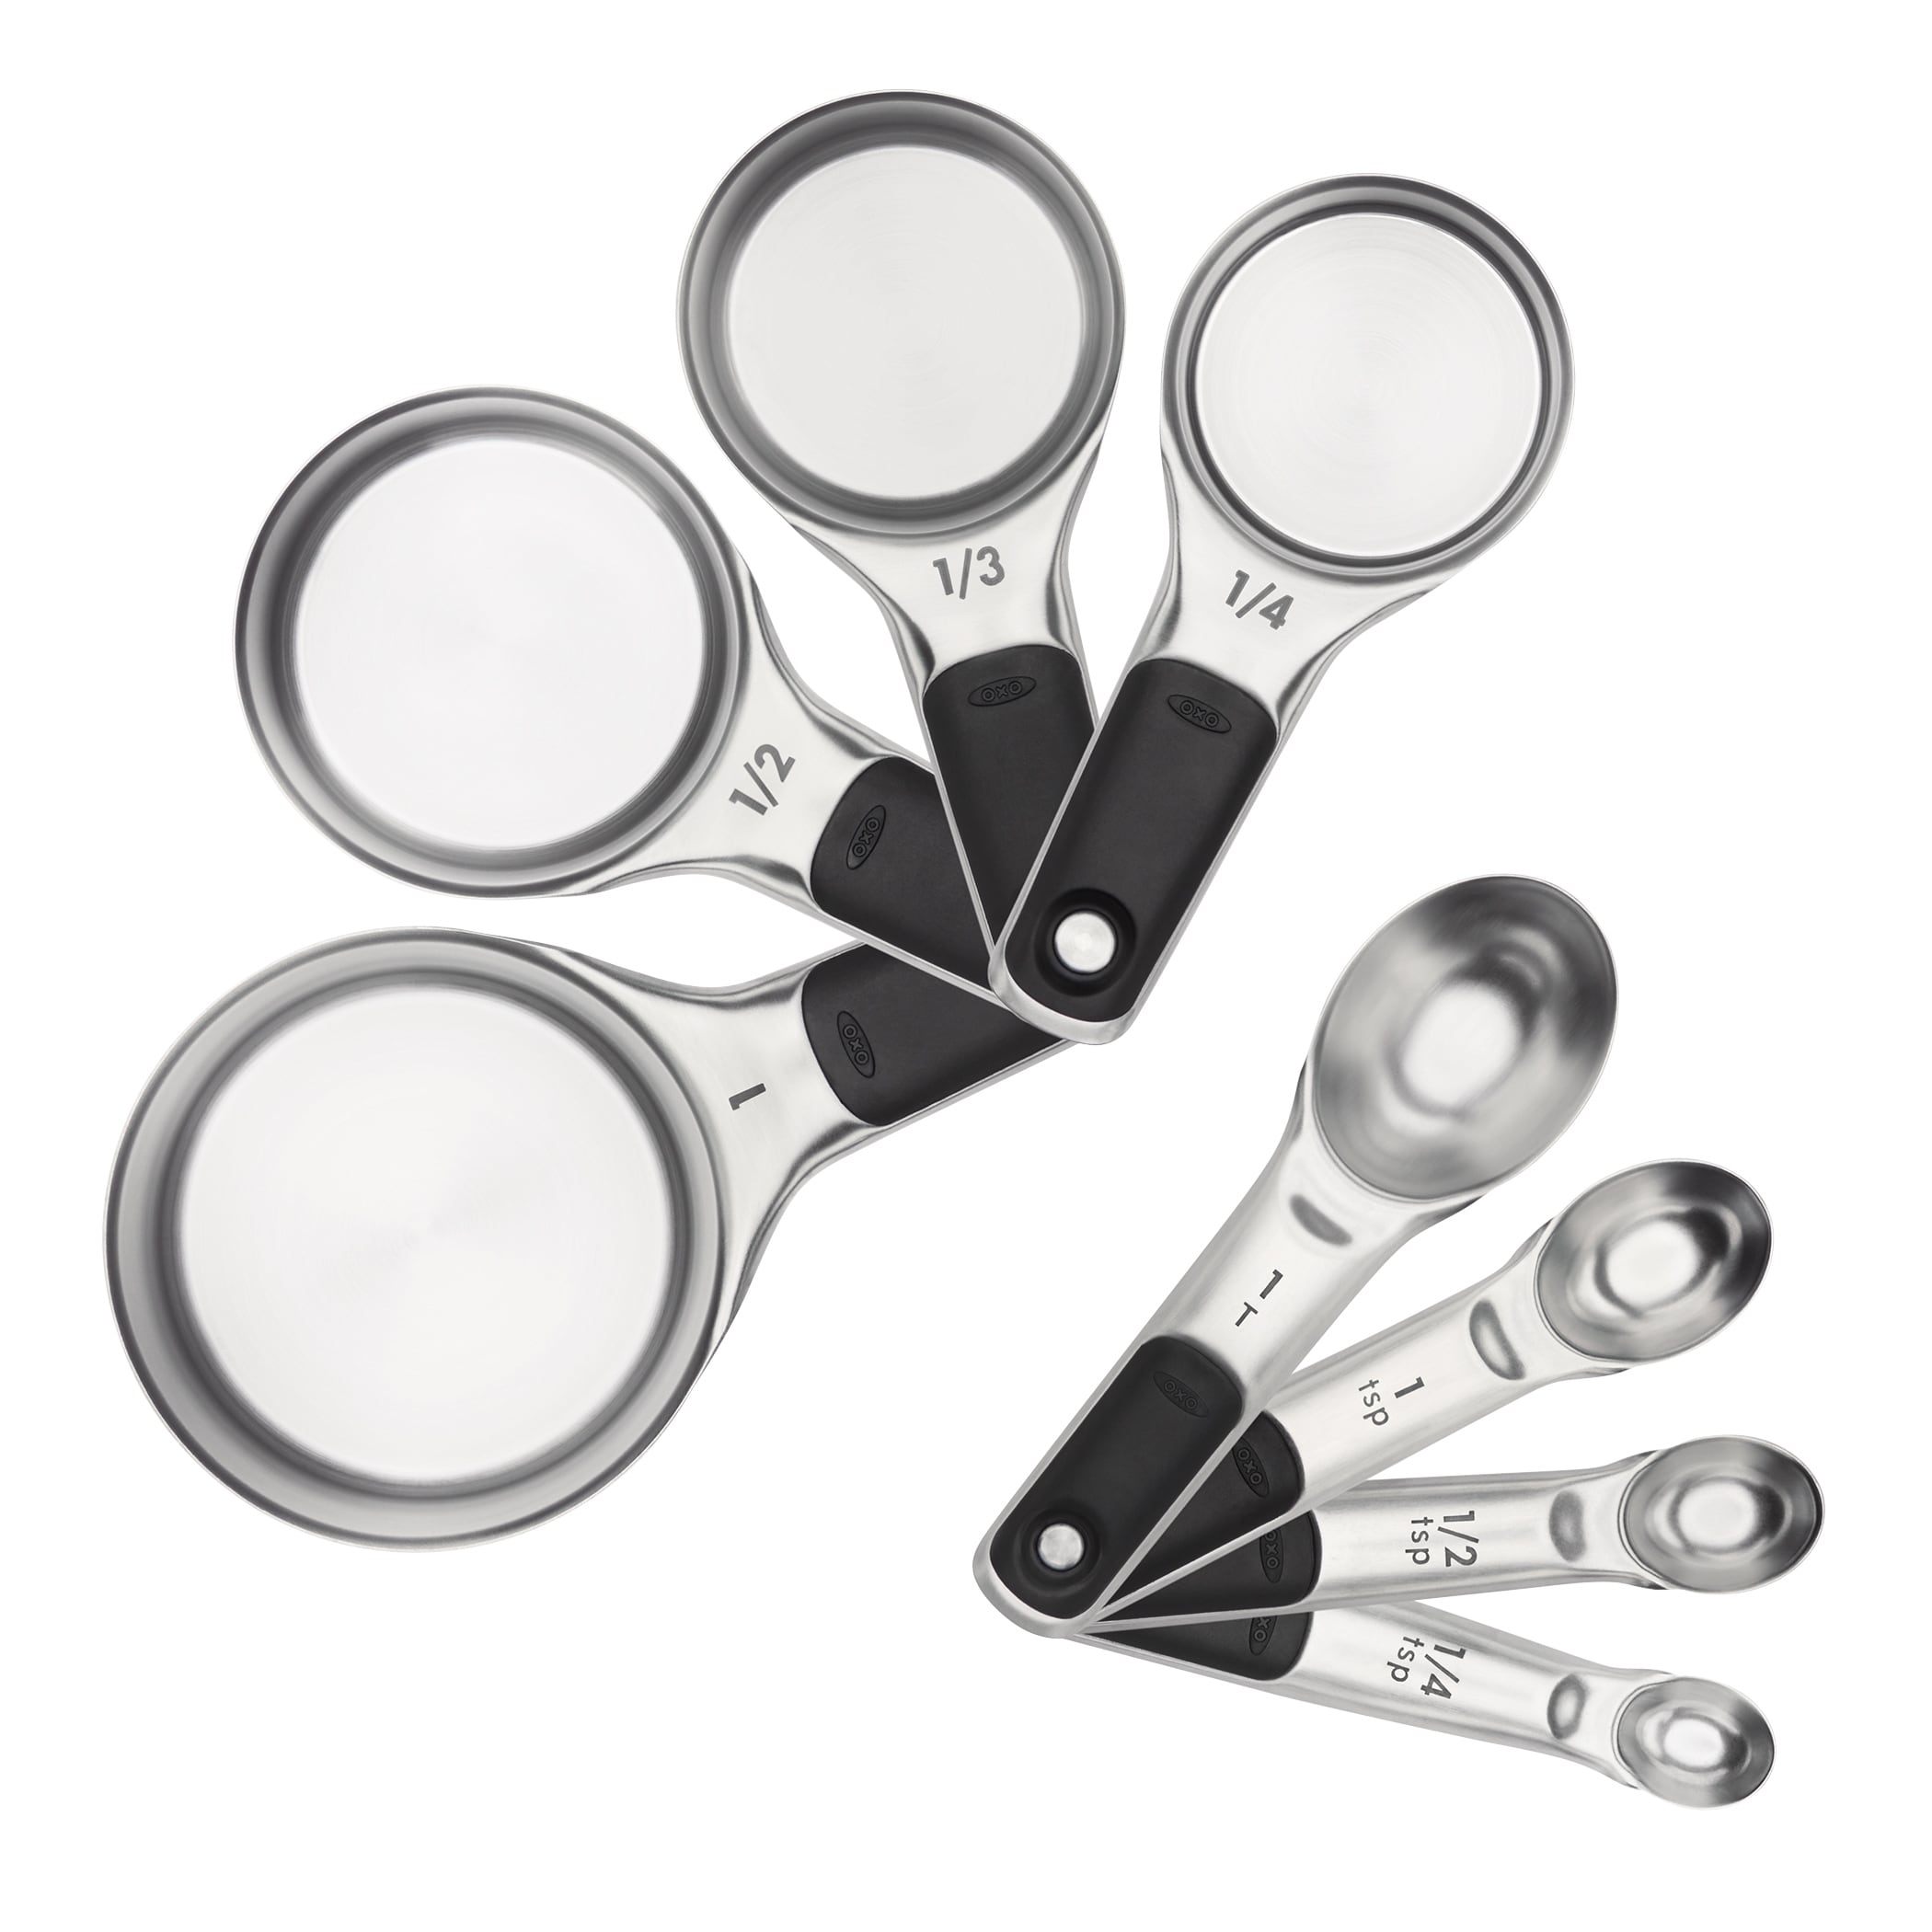 ELITRA HOME Measuring Cups and Spoons Set 13 Piece, Stainless